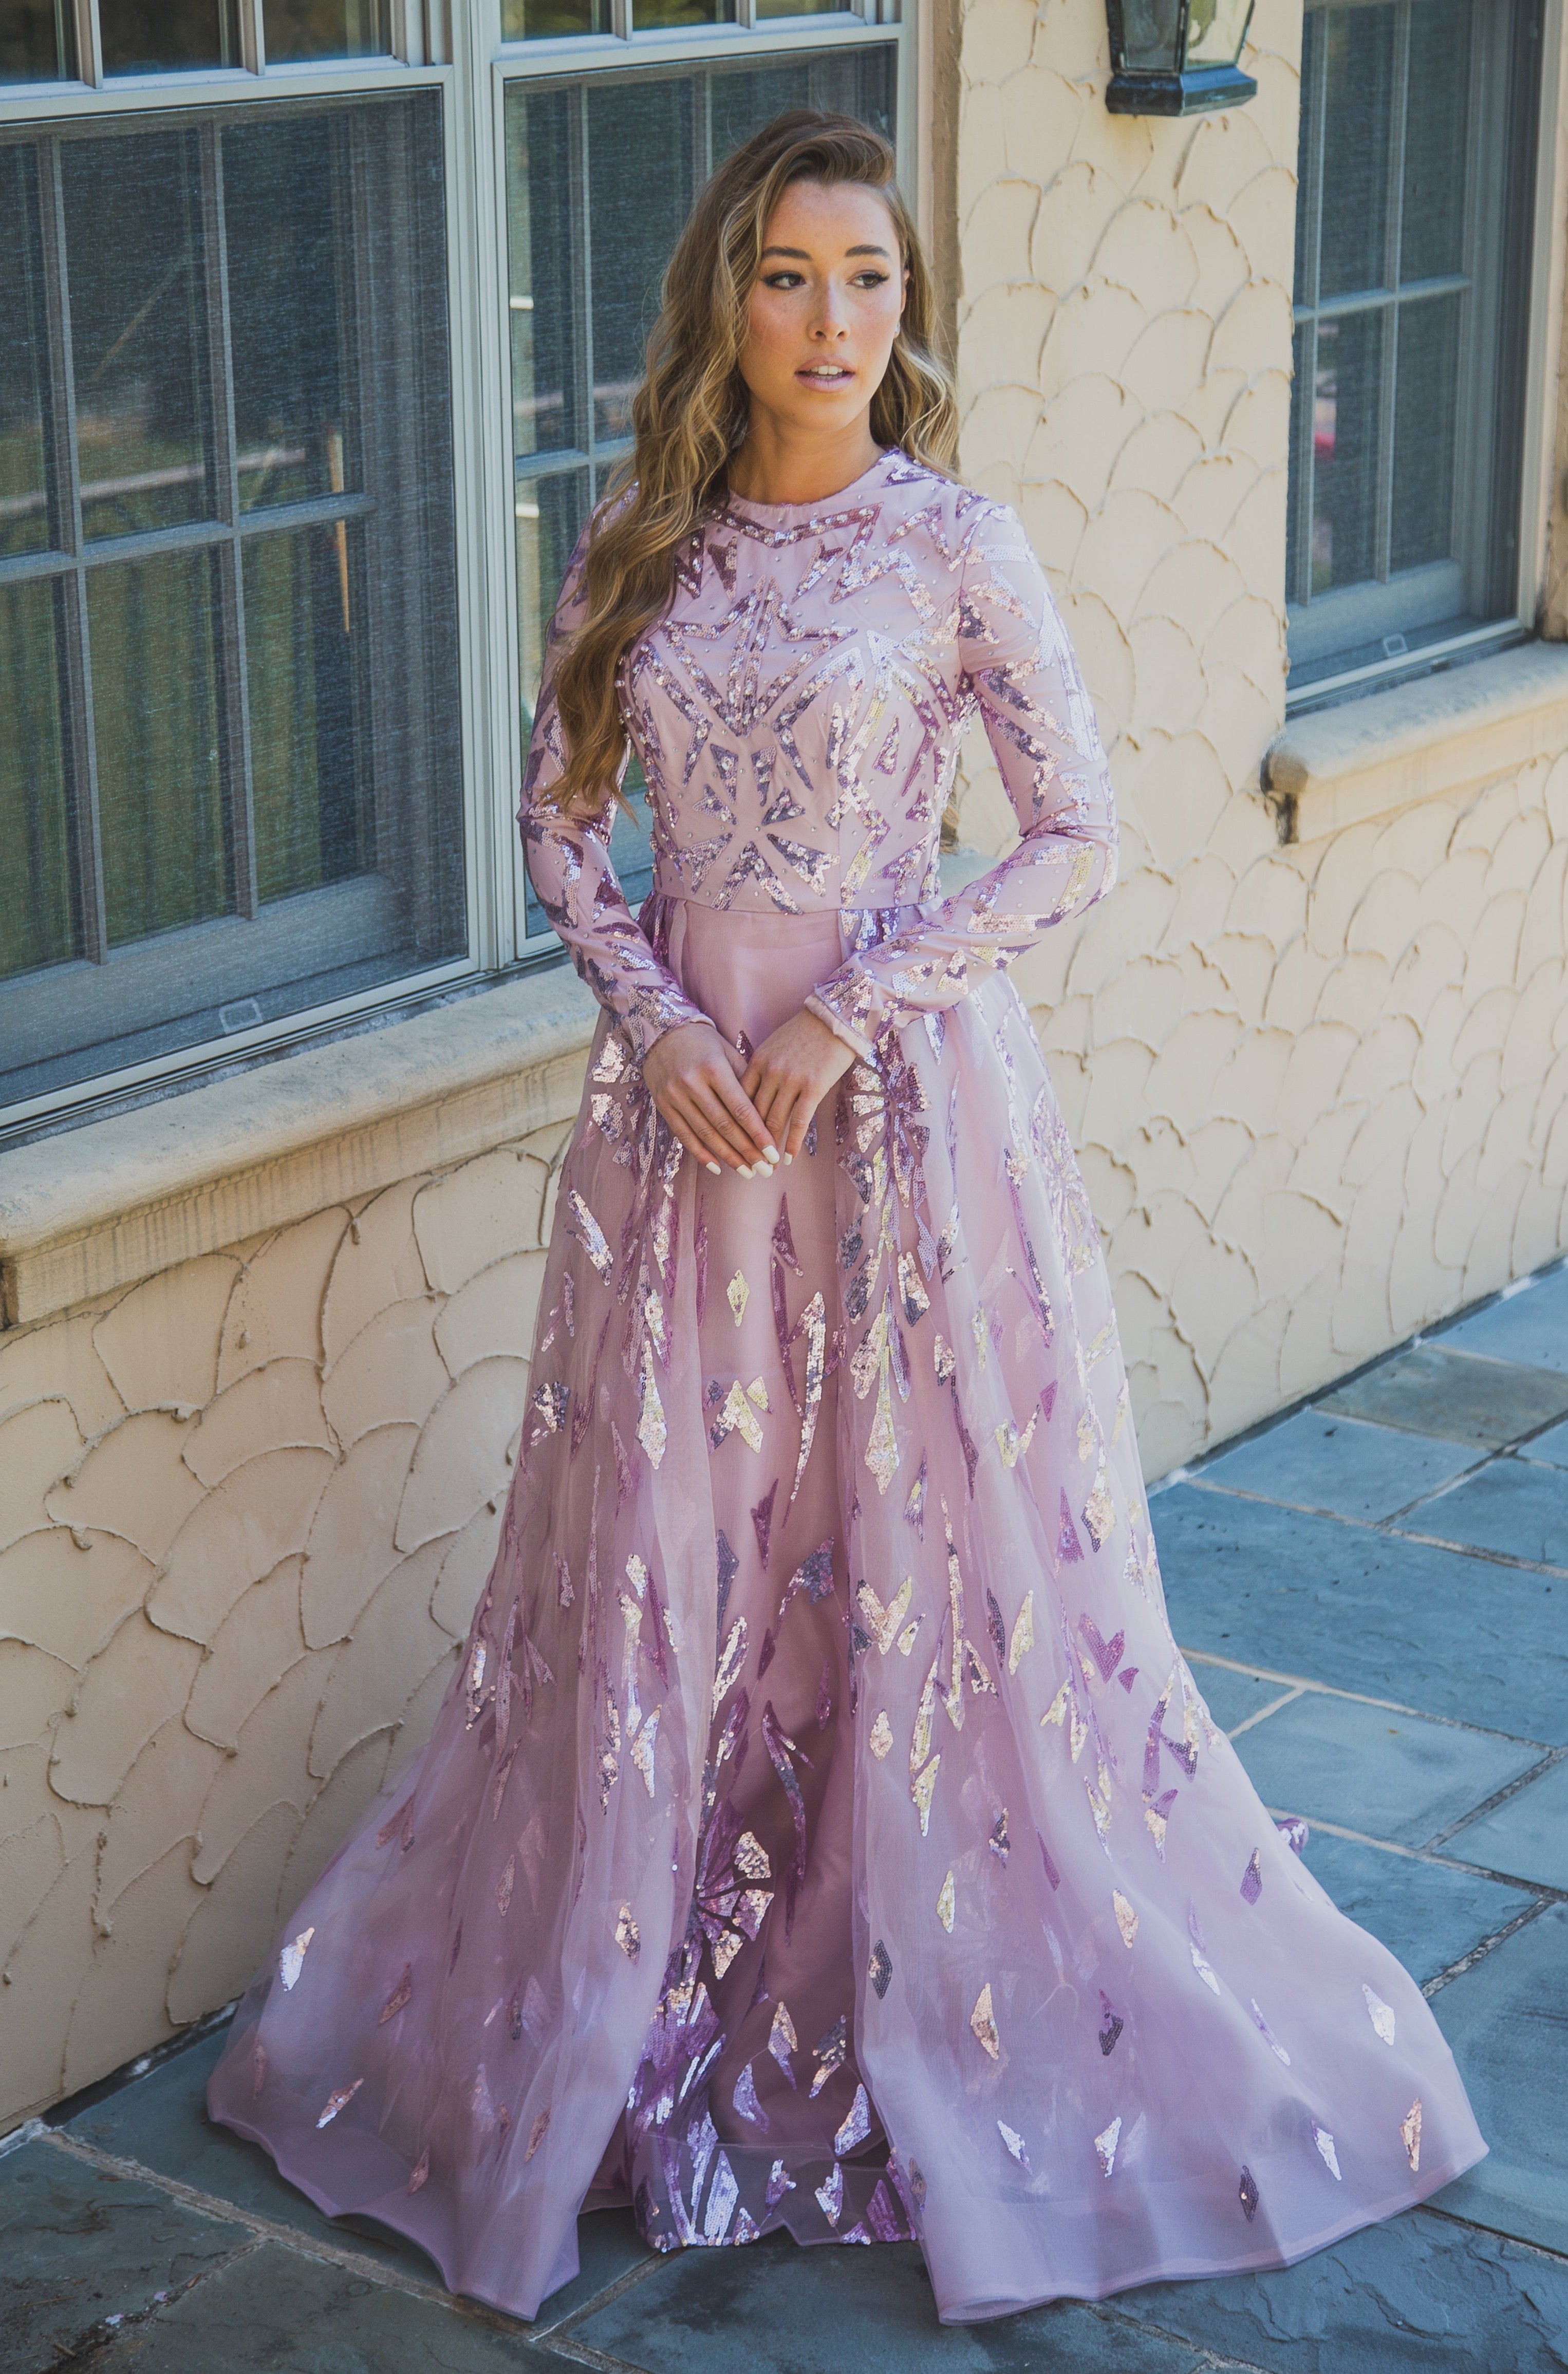 Gorgeous Gowns for Special Occasions: From Ball Gowns to Mermaid Silhouettes